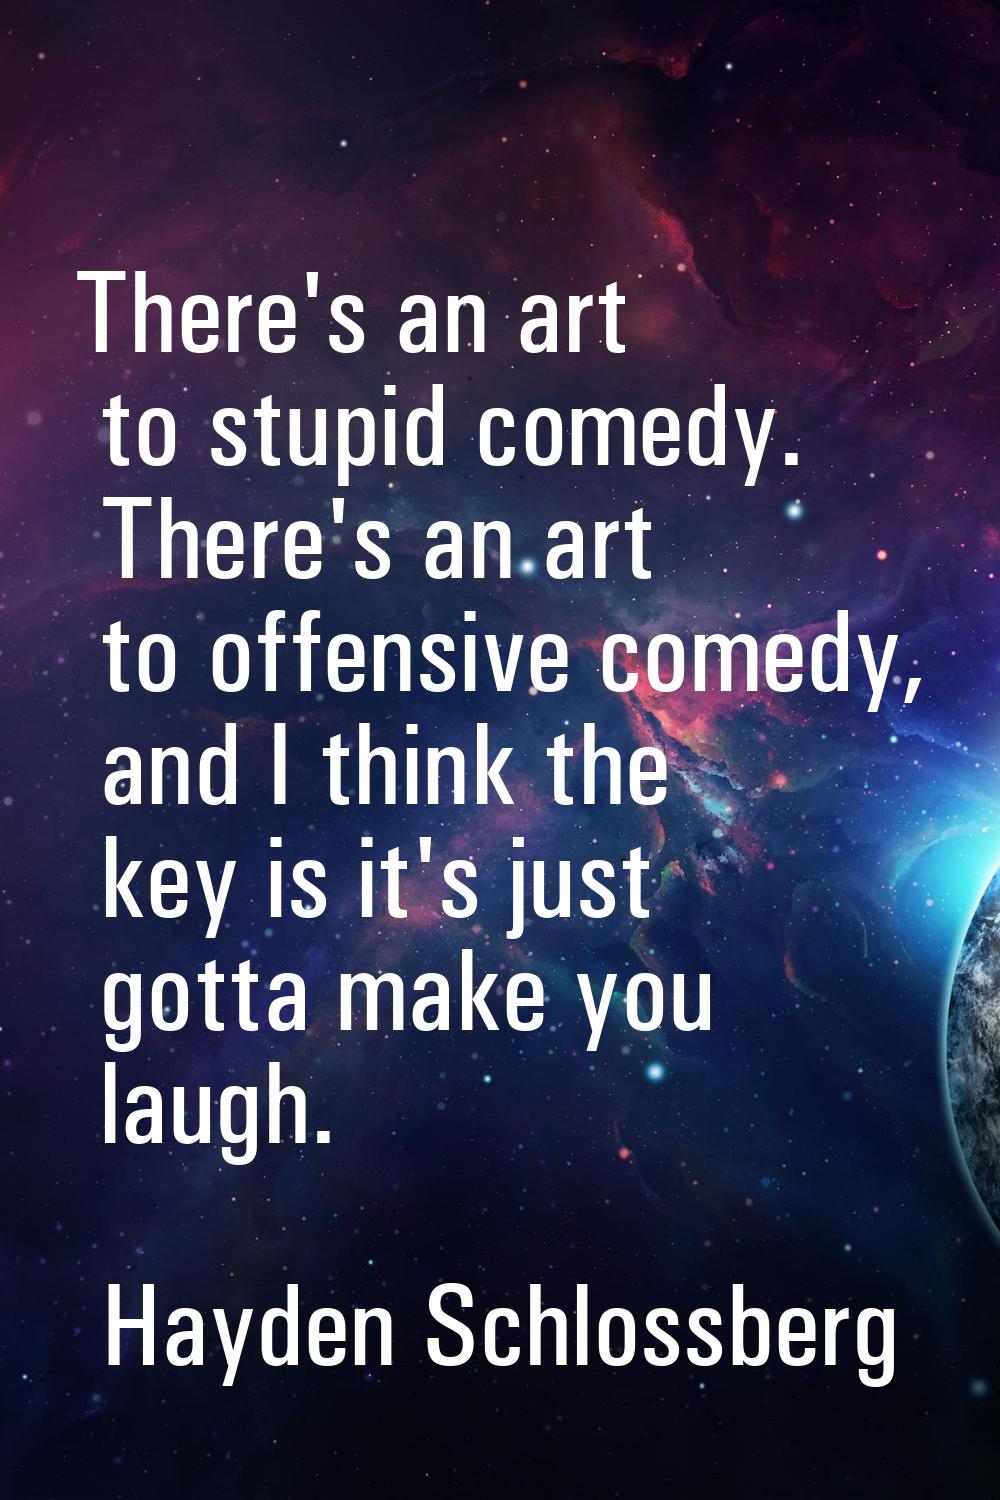 There's an art to stupid comedy. There's an art to offensive comedy, and I think the key is it's ju